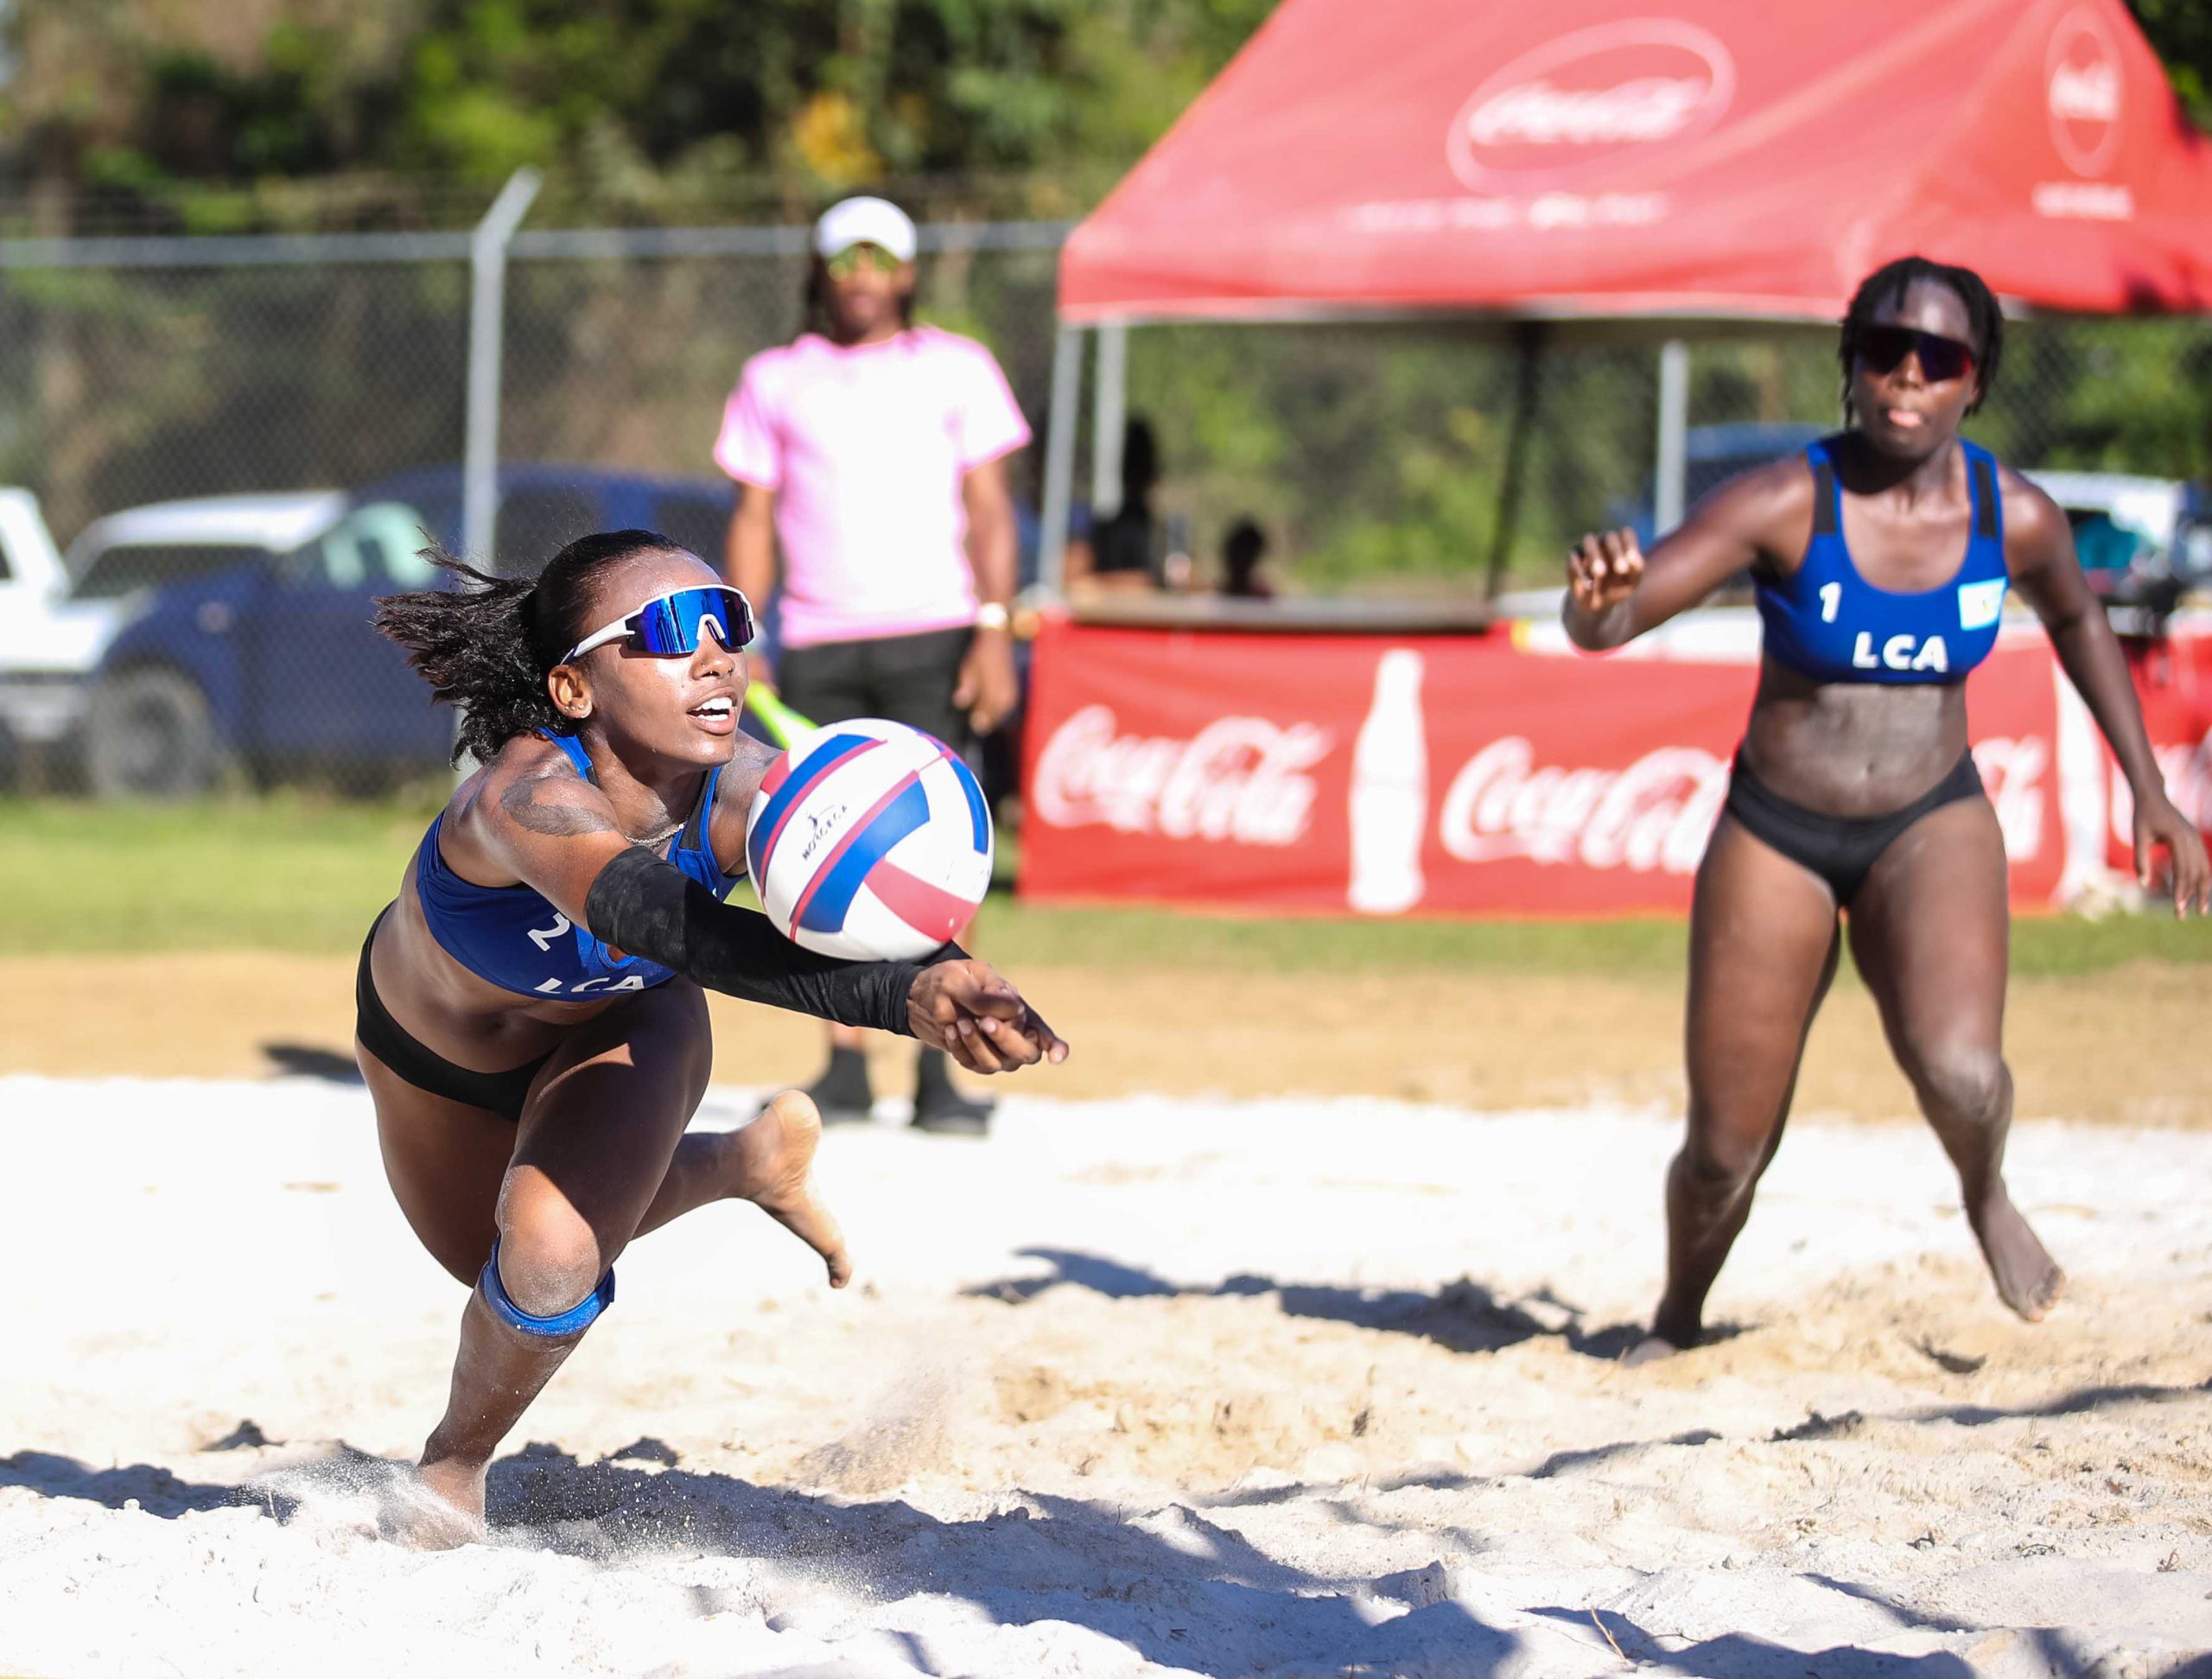 Women set up title charge in ECVA Beach Volleyball  